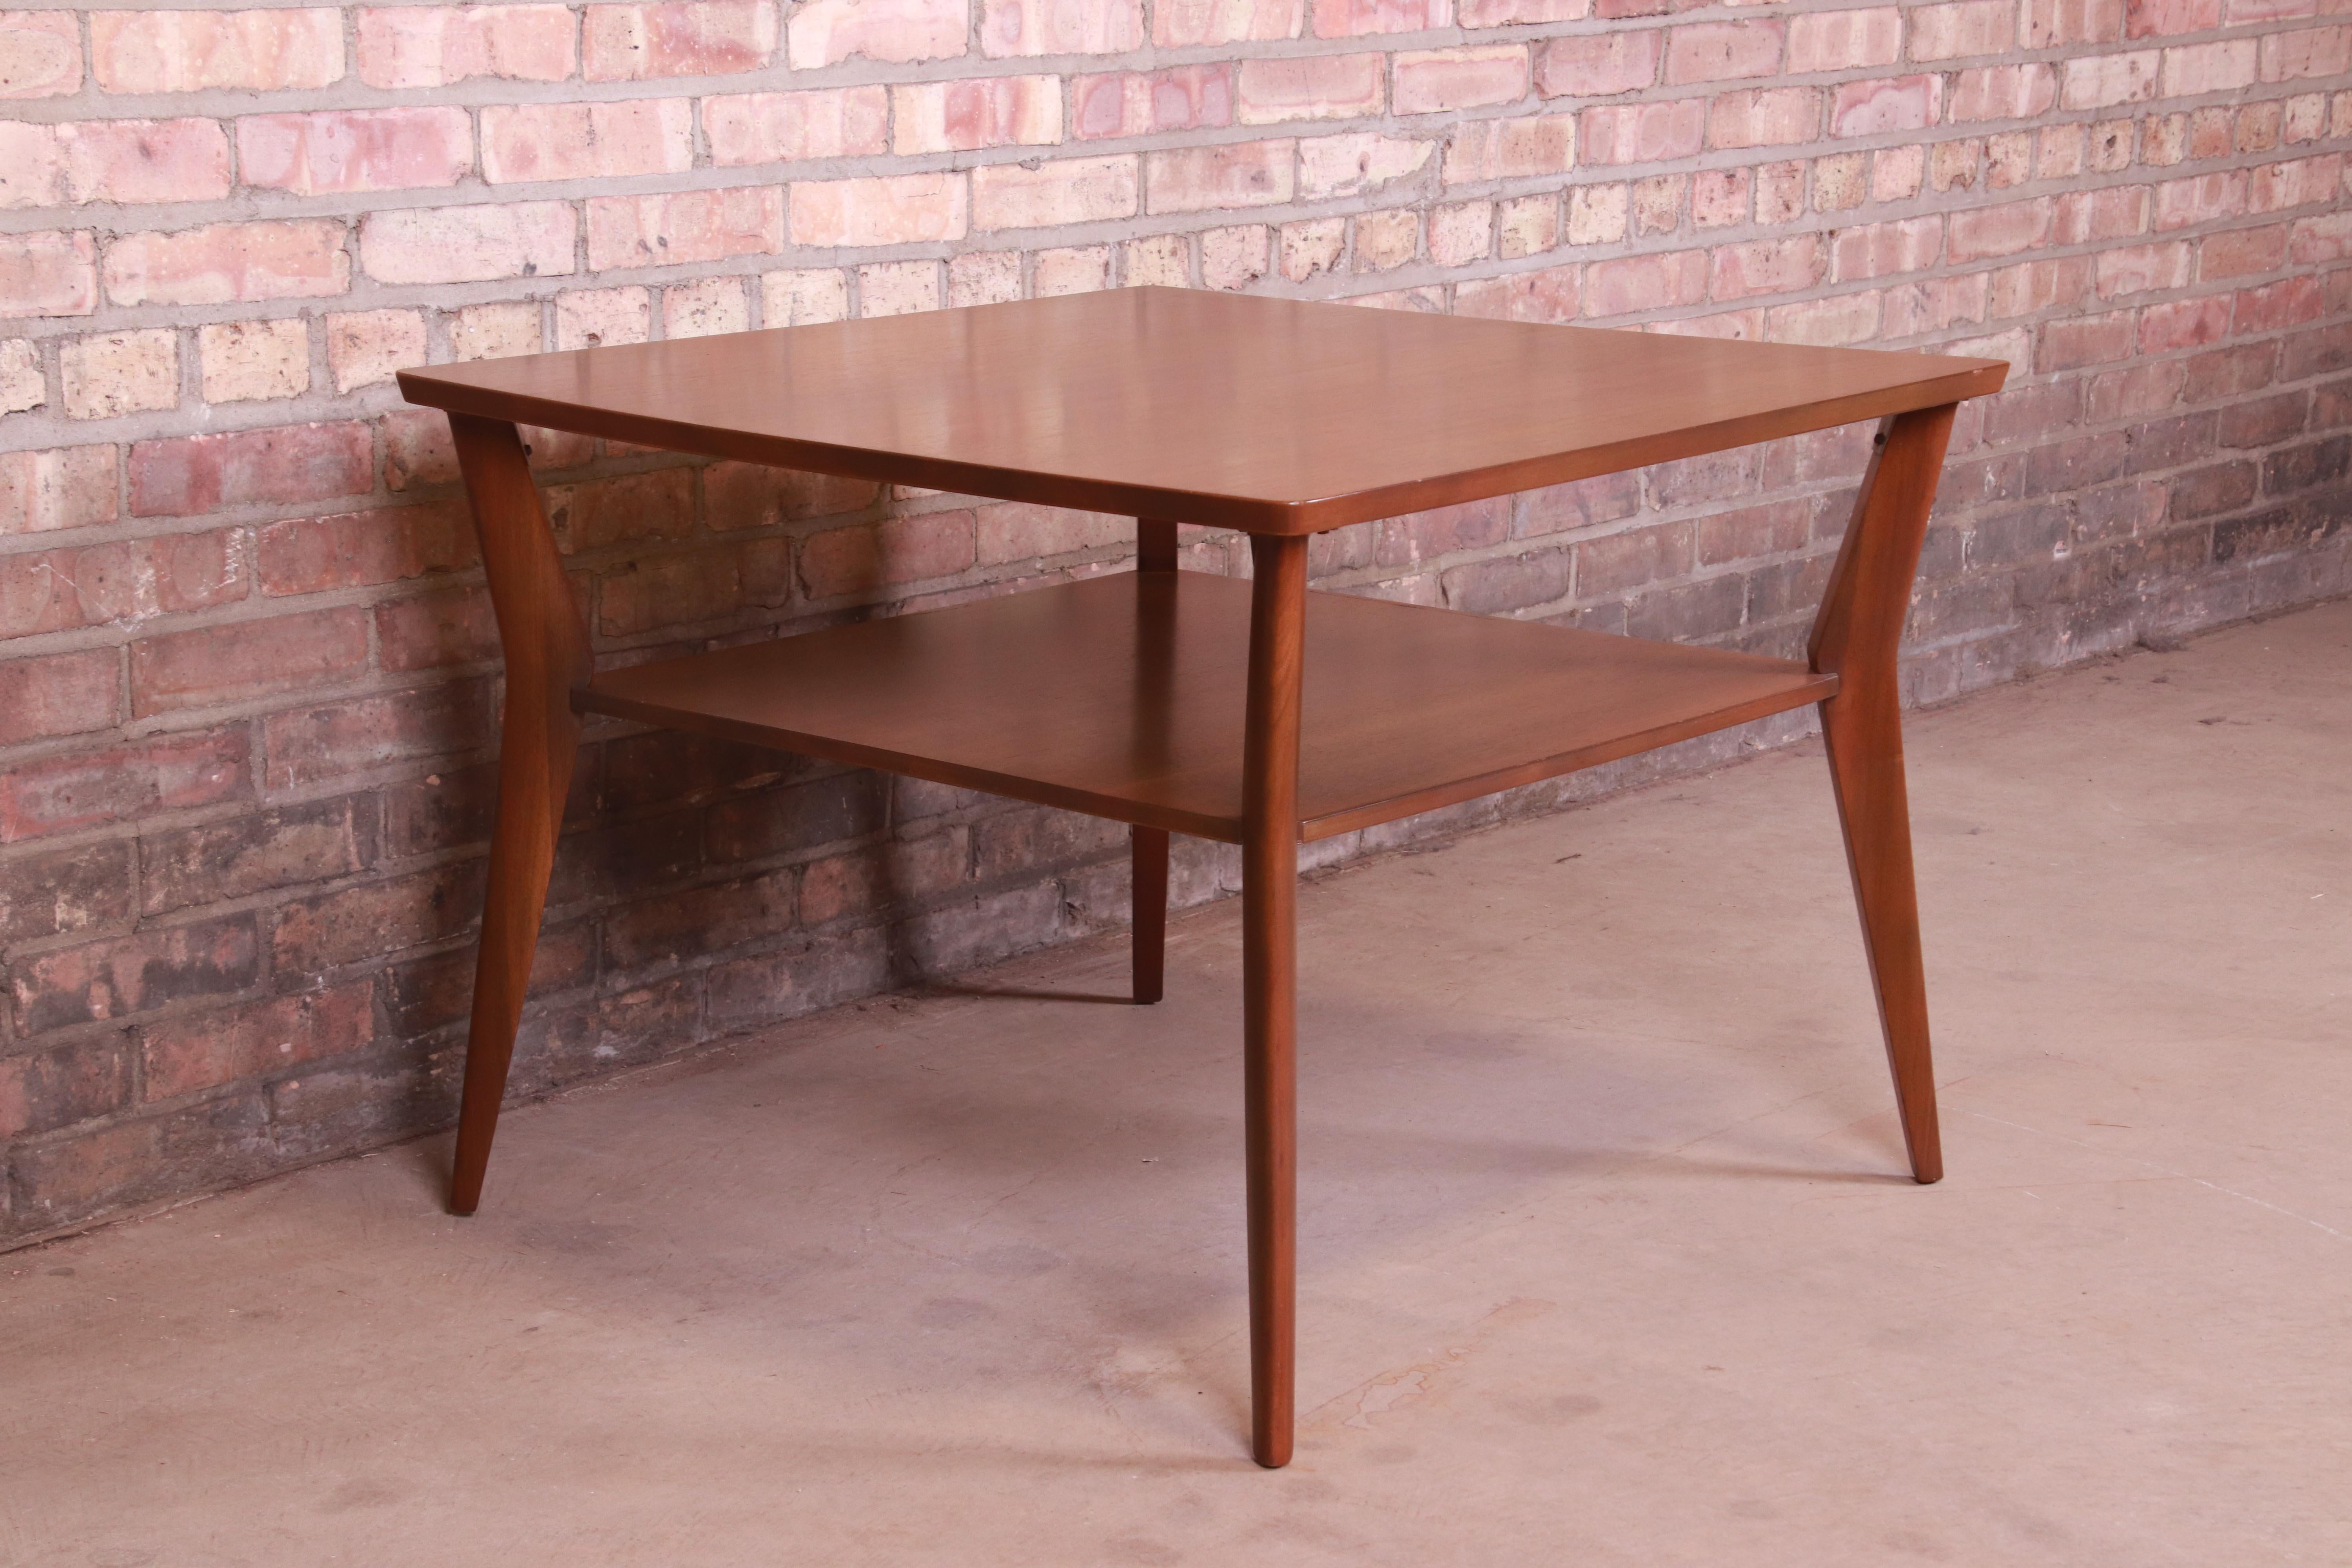 American Mid-Century Modern Walnut Cocktail Table or Occasional Side Table by Mersman